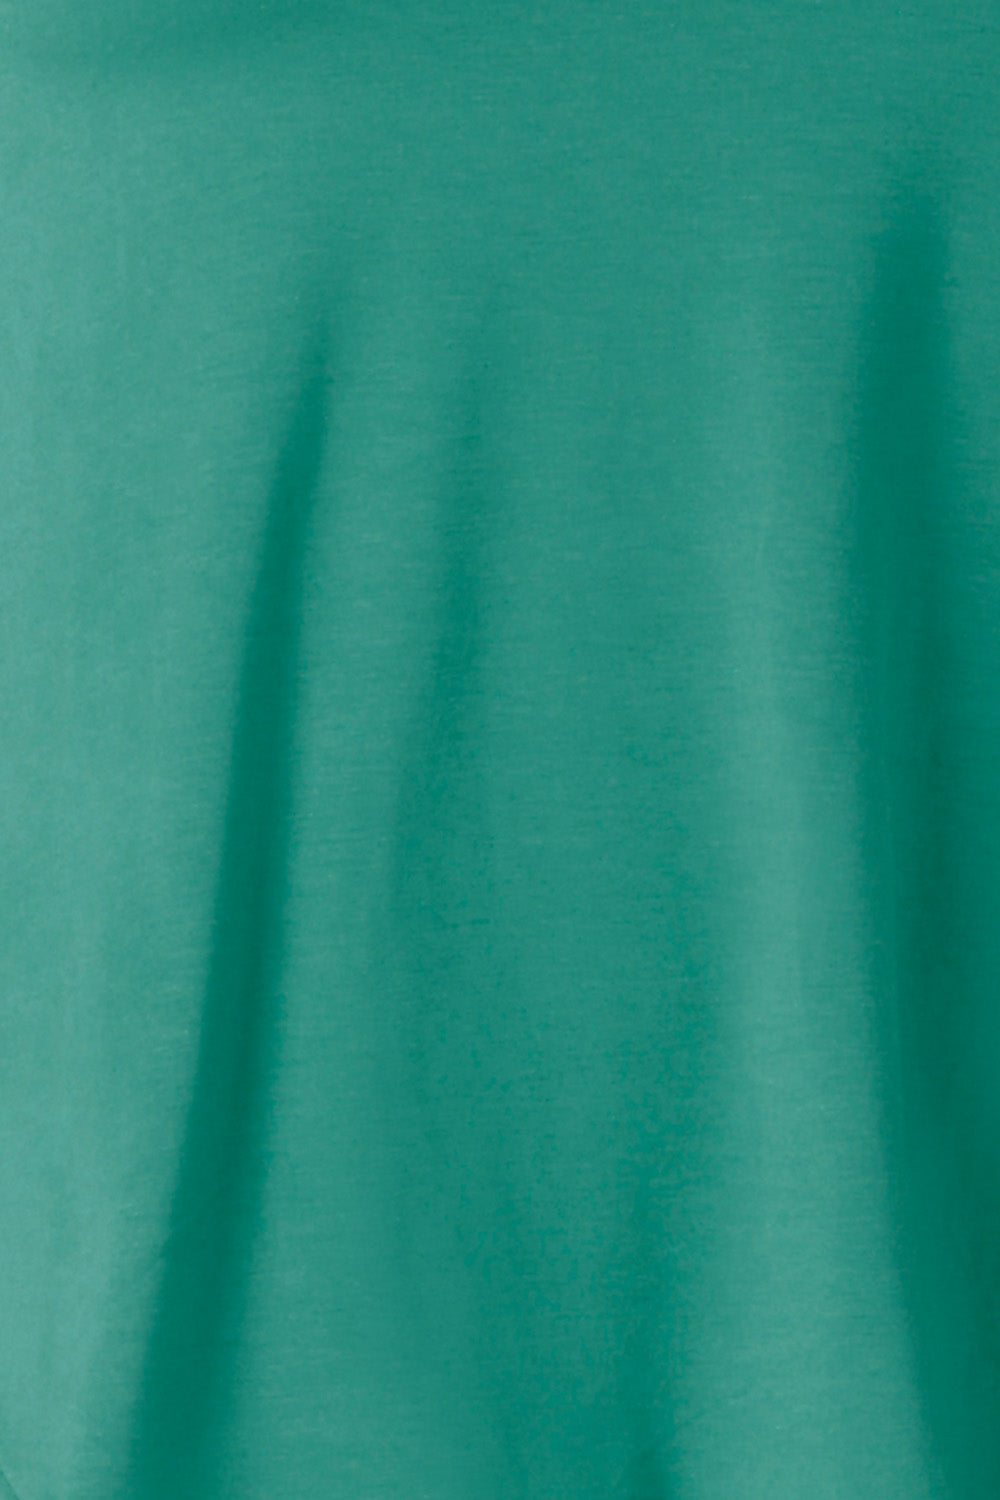 swatch of Australian and New Zealand fashion label L&F's jade green bamboo jersey fabric used to make women's casual tops.